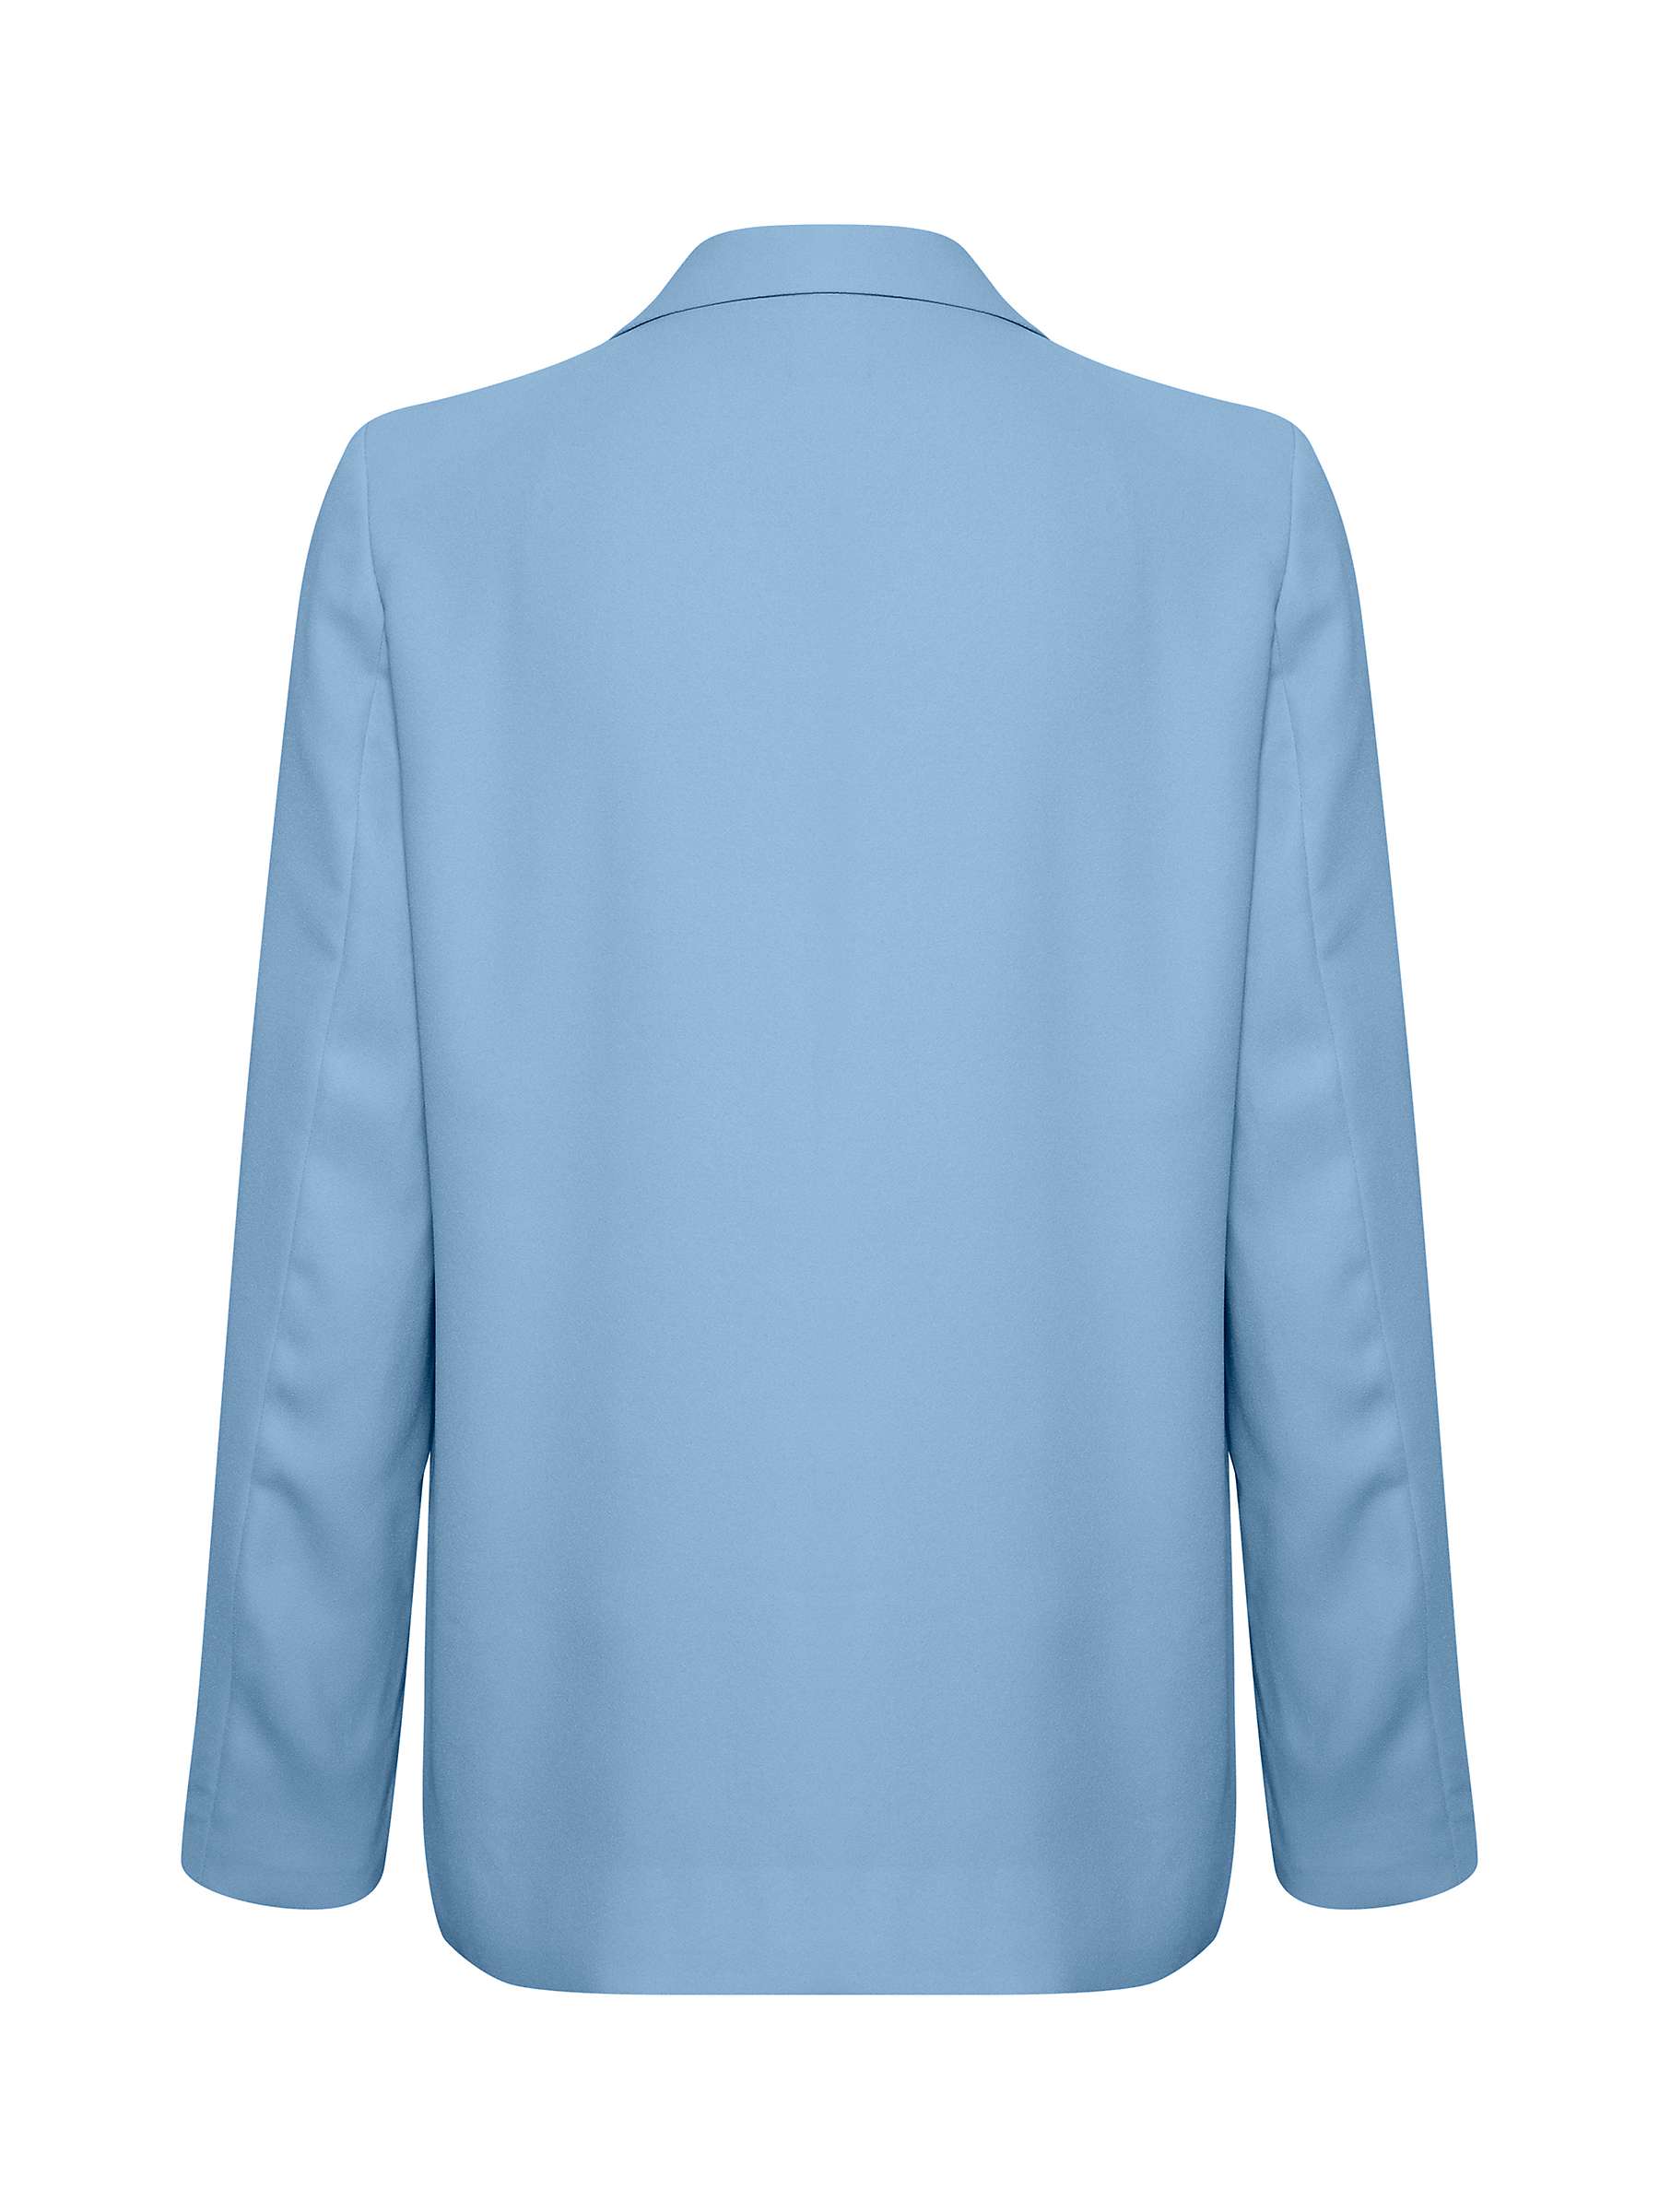 Buy Soaked In Luxury Shirley Long Sleeve Blazer, Allure Online at johnlewis.com